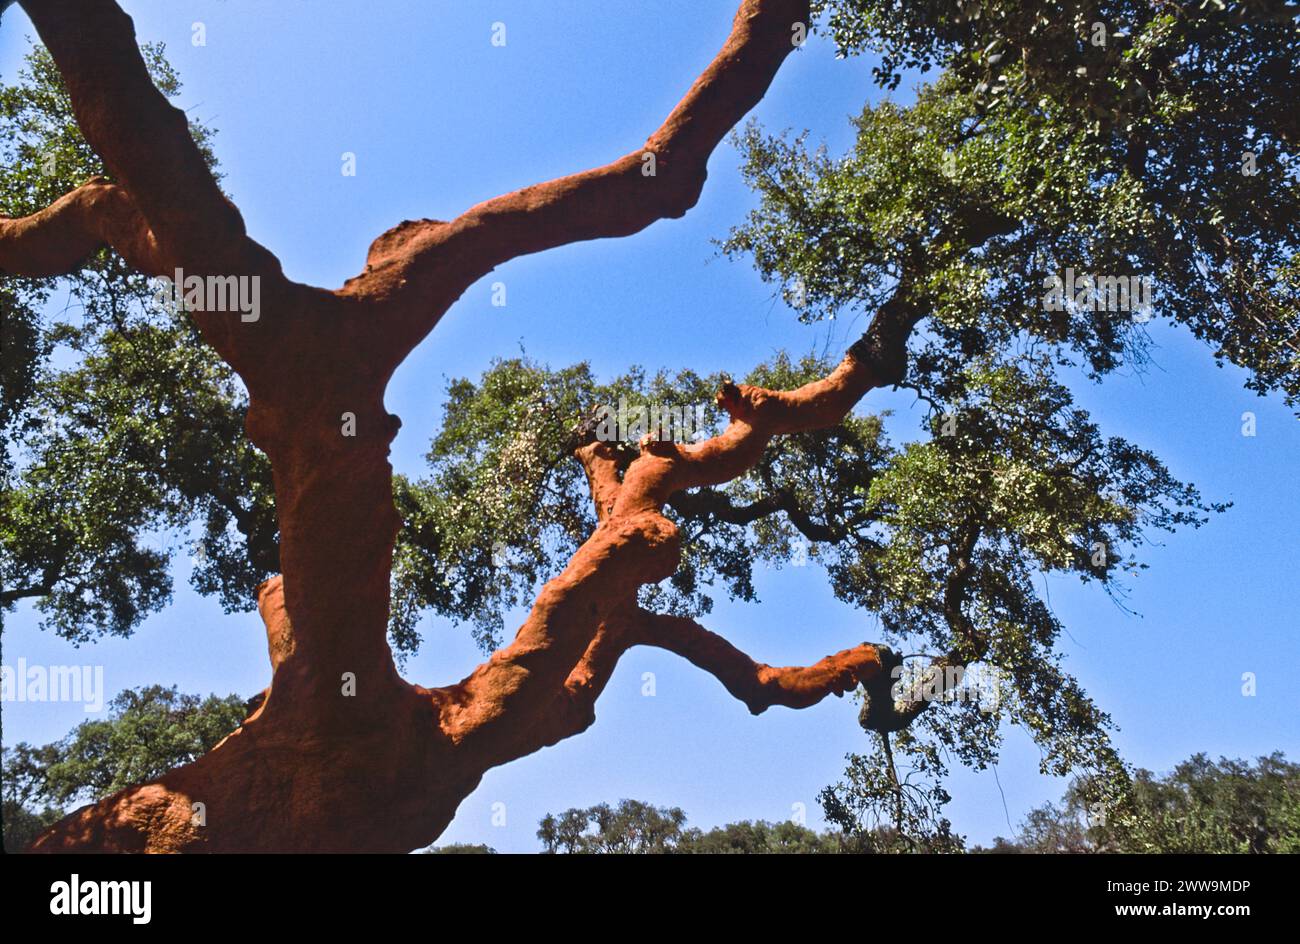 the cork oak (Quercus suber L.) grows in central and southern Portugal,  which produces half the cork harvested annually in the world - Alentejo area Stock Photo